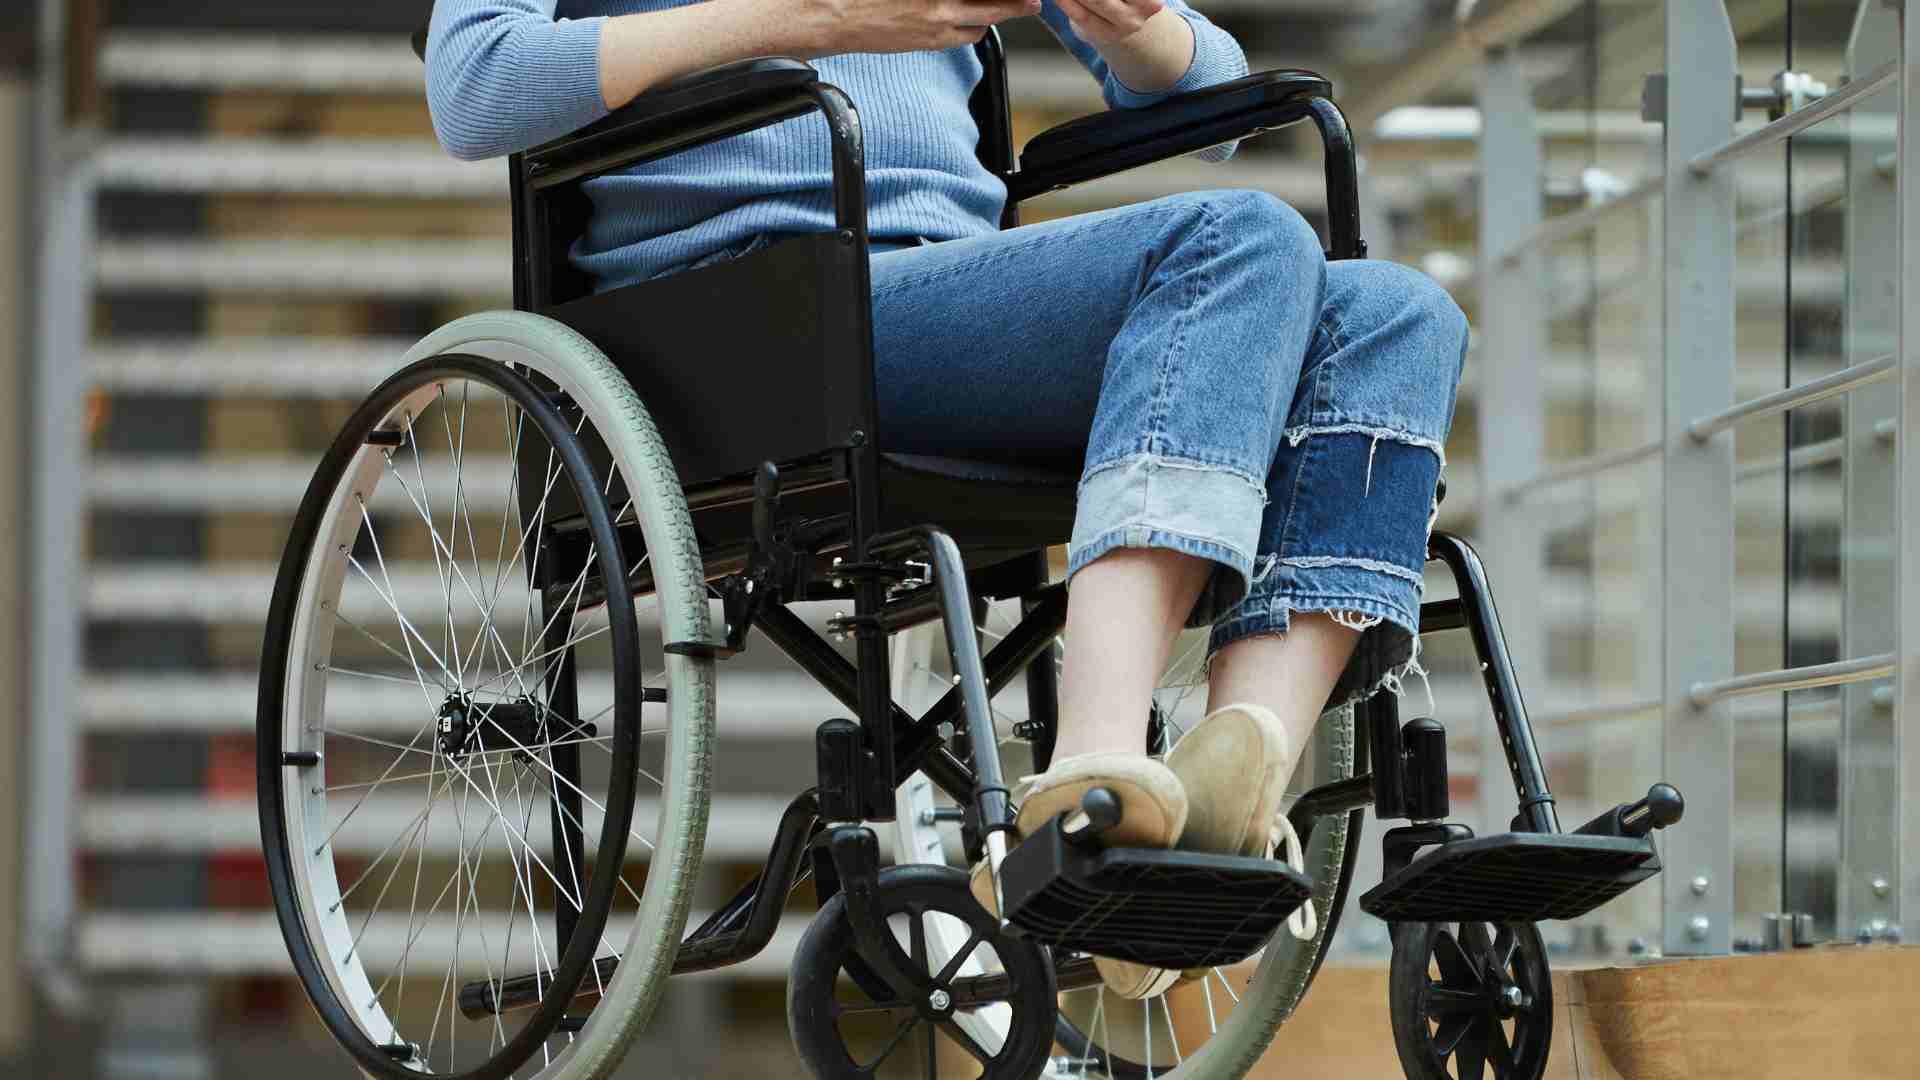 Disability benefits are due on February 14, check if you qualify for this Social Security payment